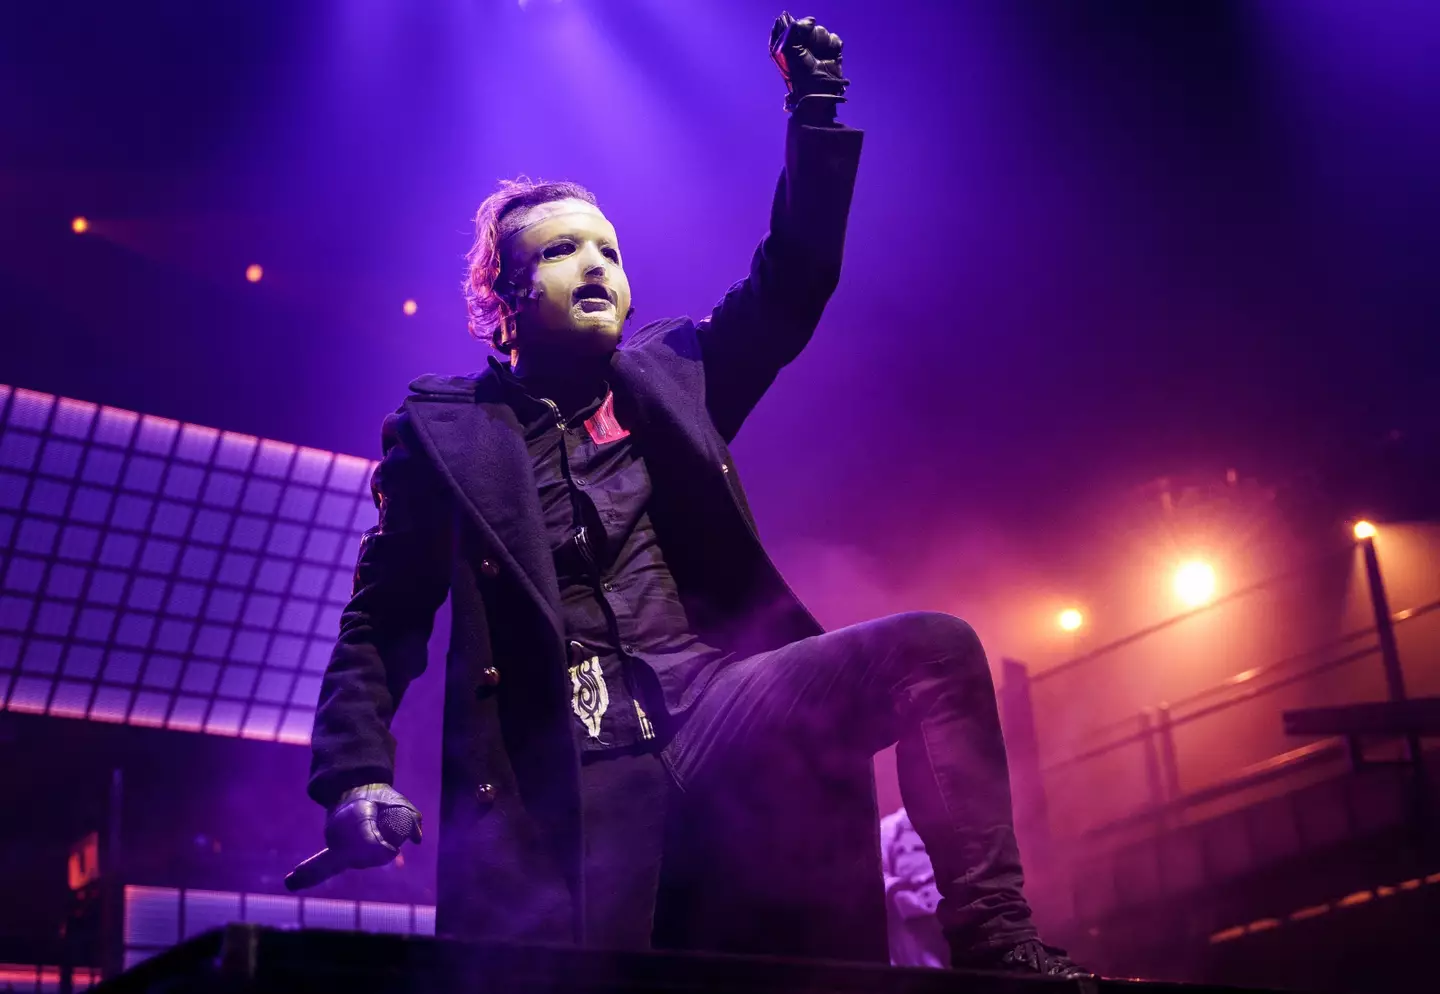 Slipknot lead singer Corey Taylor had been trying to collaborate with Machine Gun Kelly for a song on the album 'Tickets To My Downfall'.